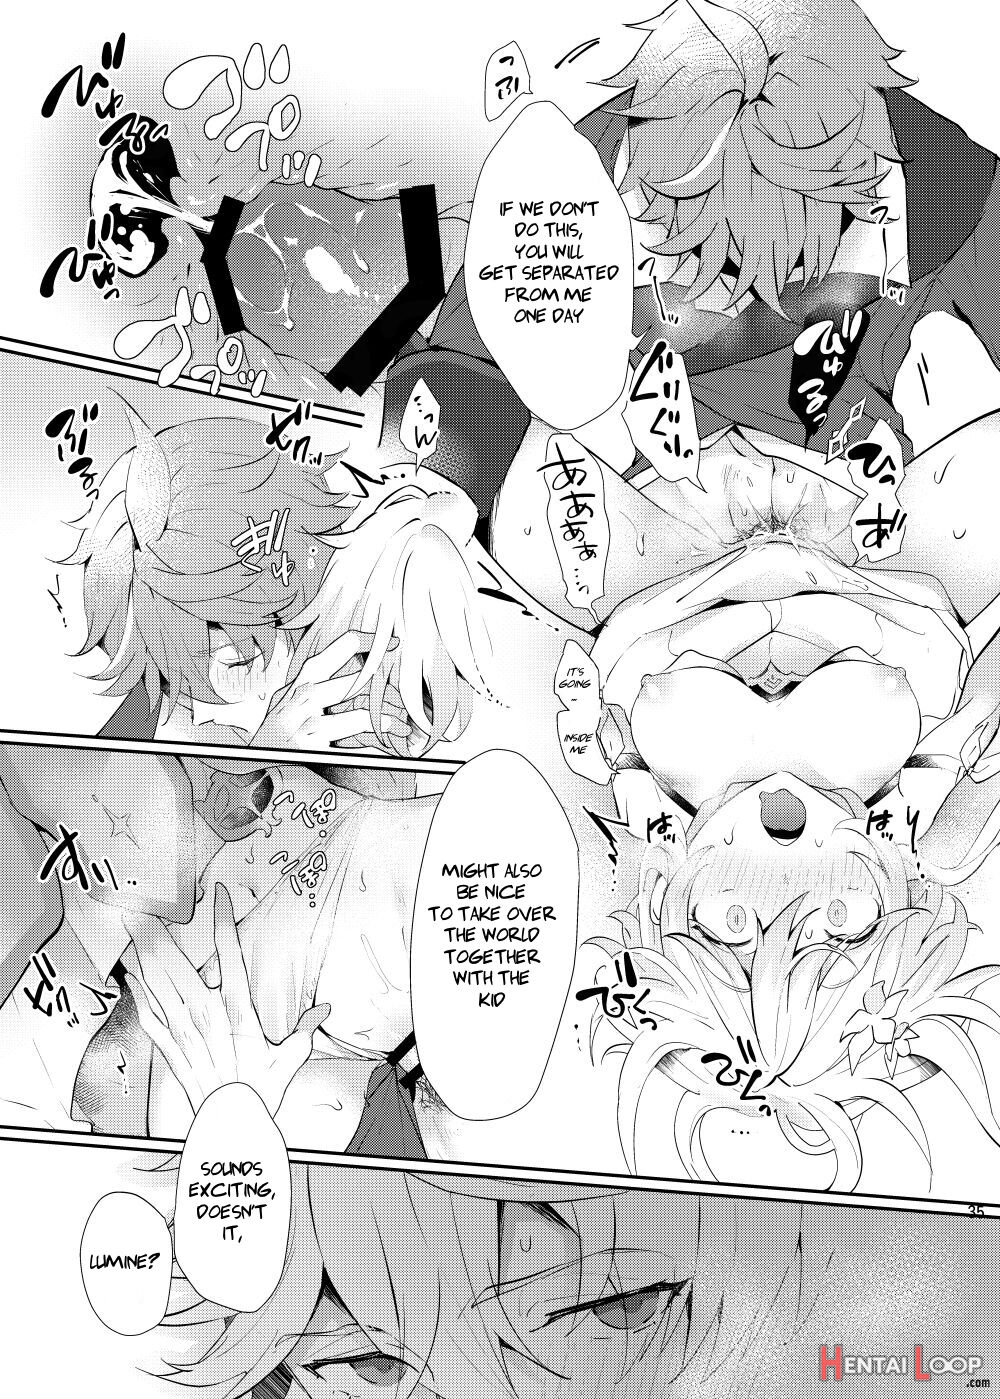 Chilumi On A Certain Monday ~in The Golden House~ page 8